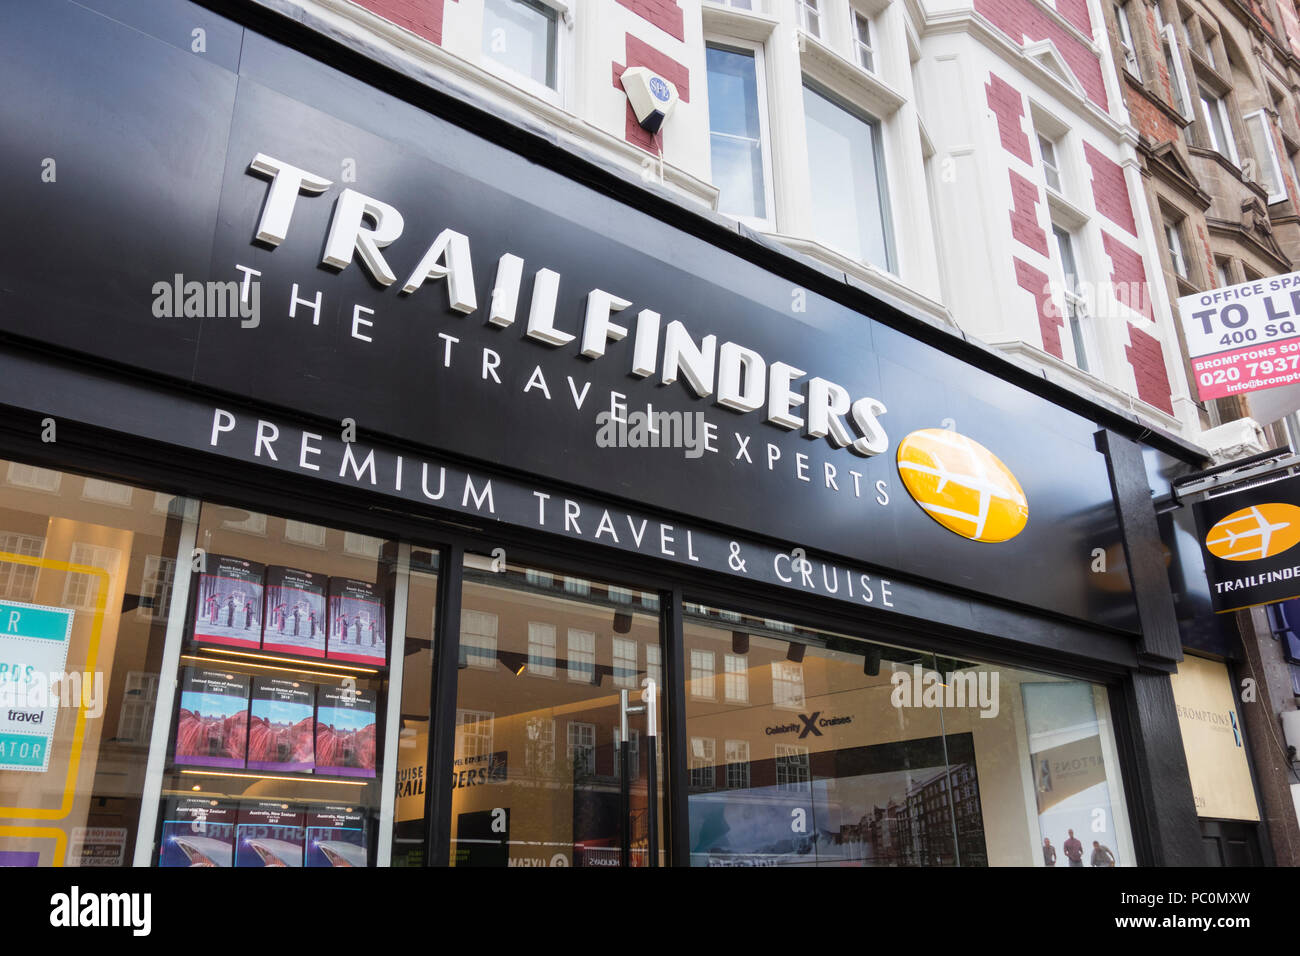 Trailfinders the independently owned Travel Experts company on Kensington High Street, London, UK Stock Photo